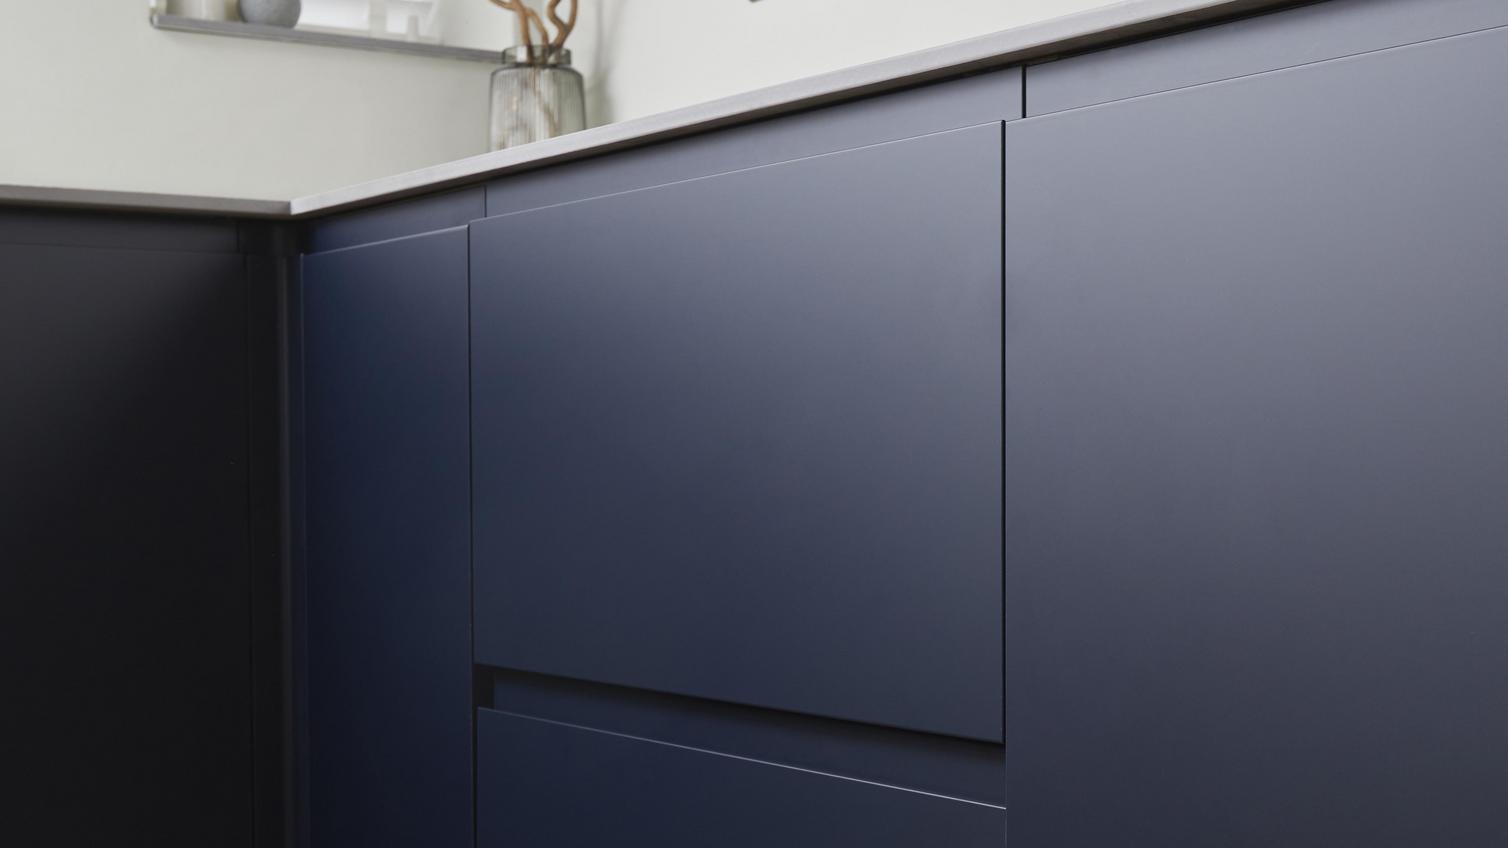 Clerkenwell matt door and drawer fronts, finished in a navy colour and integrated handle design. Also includes oak flooring.